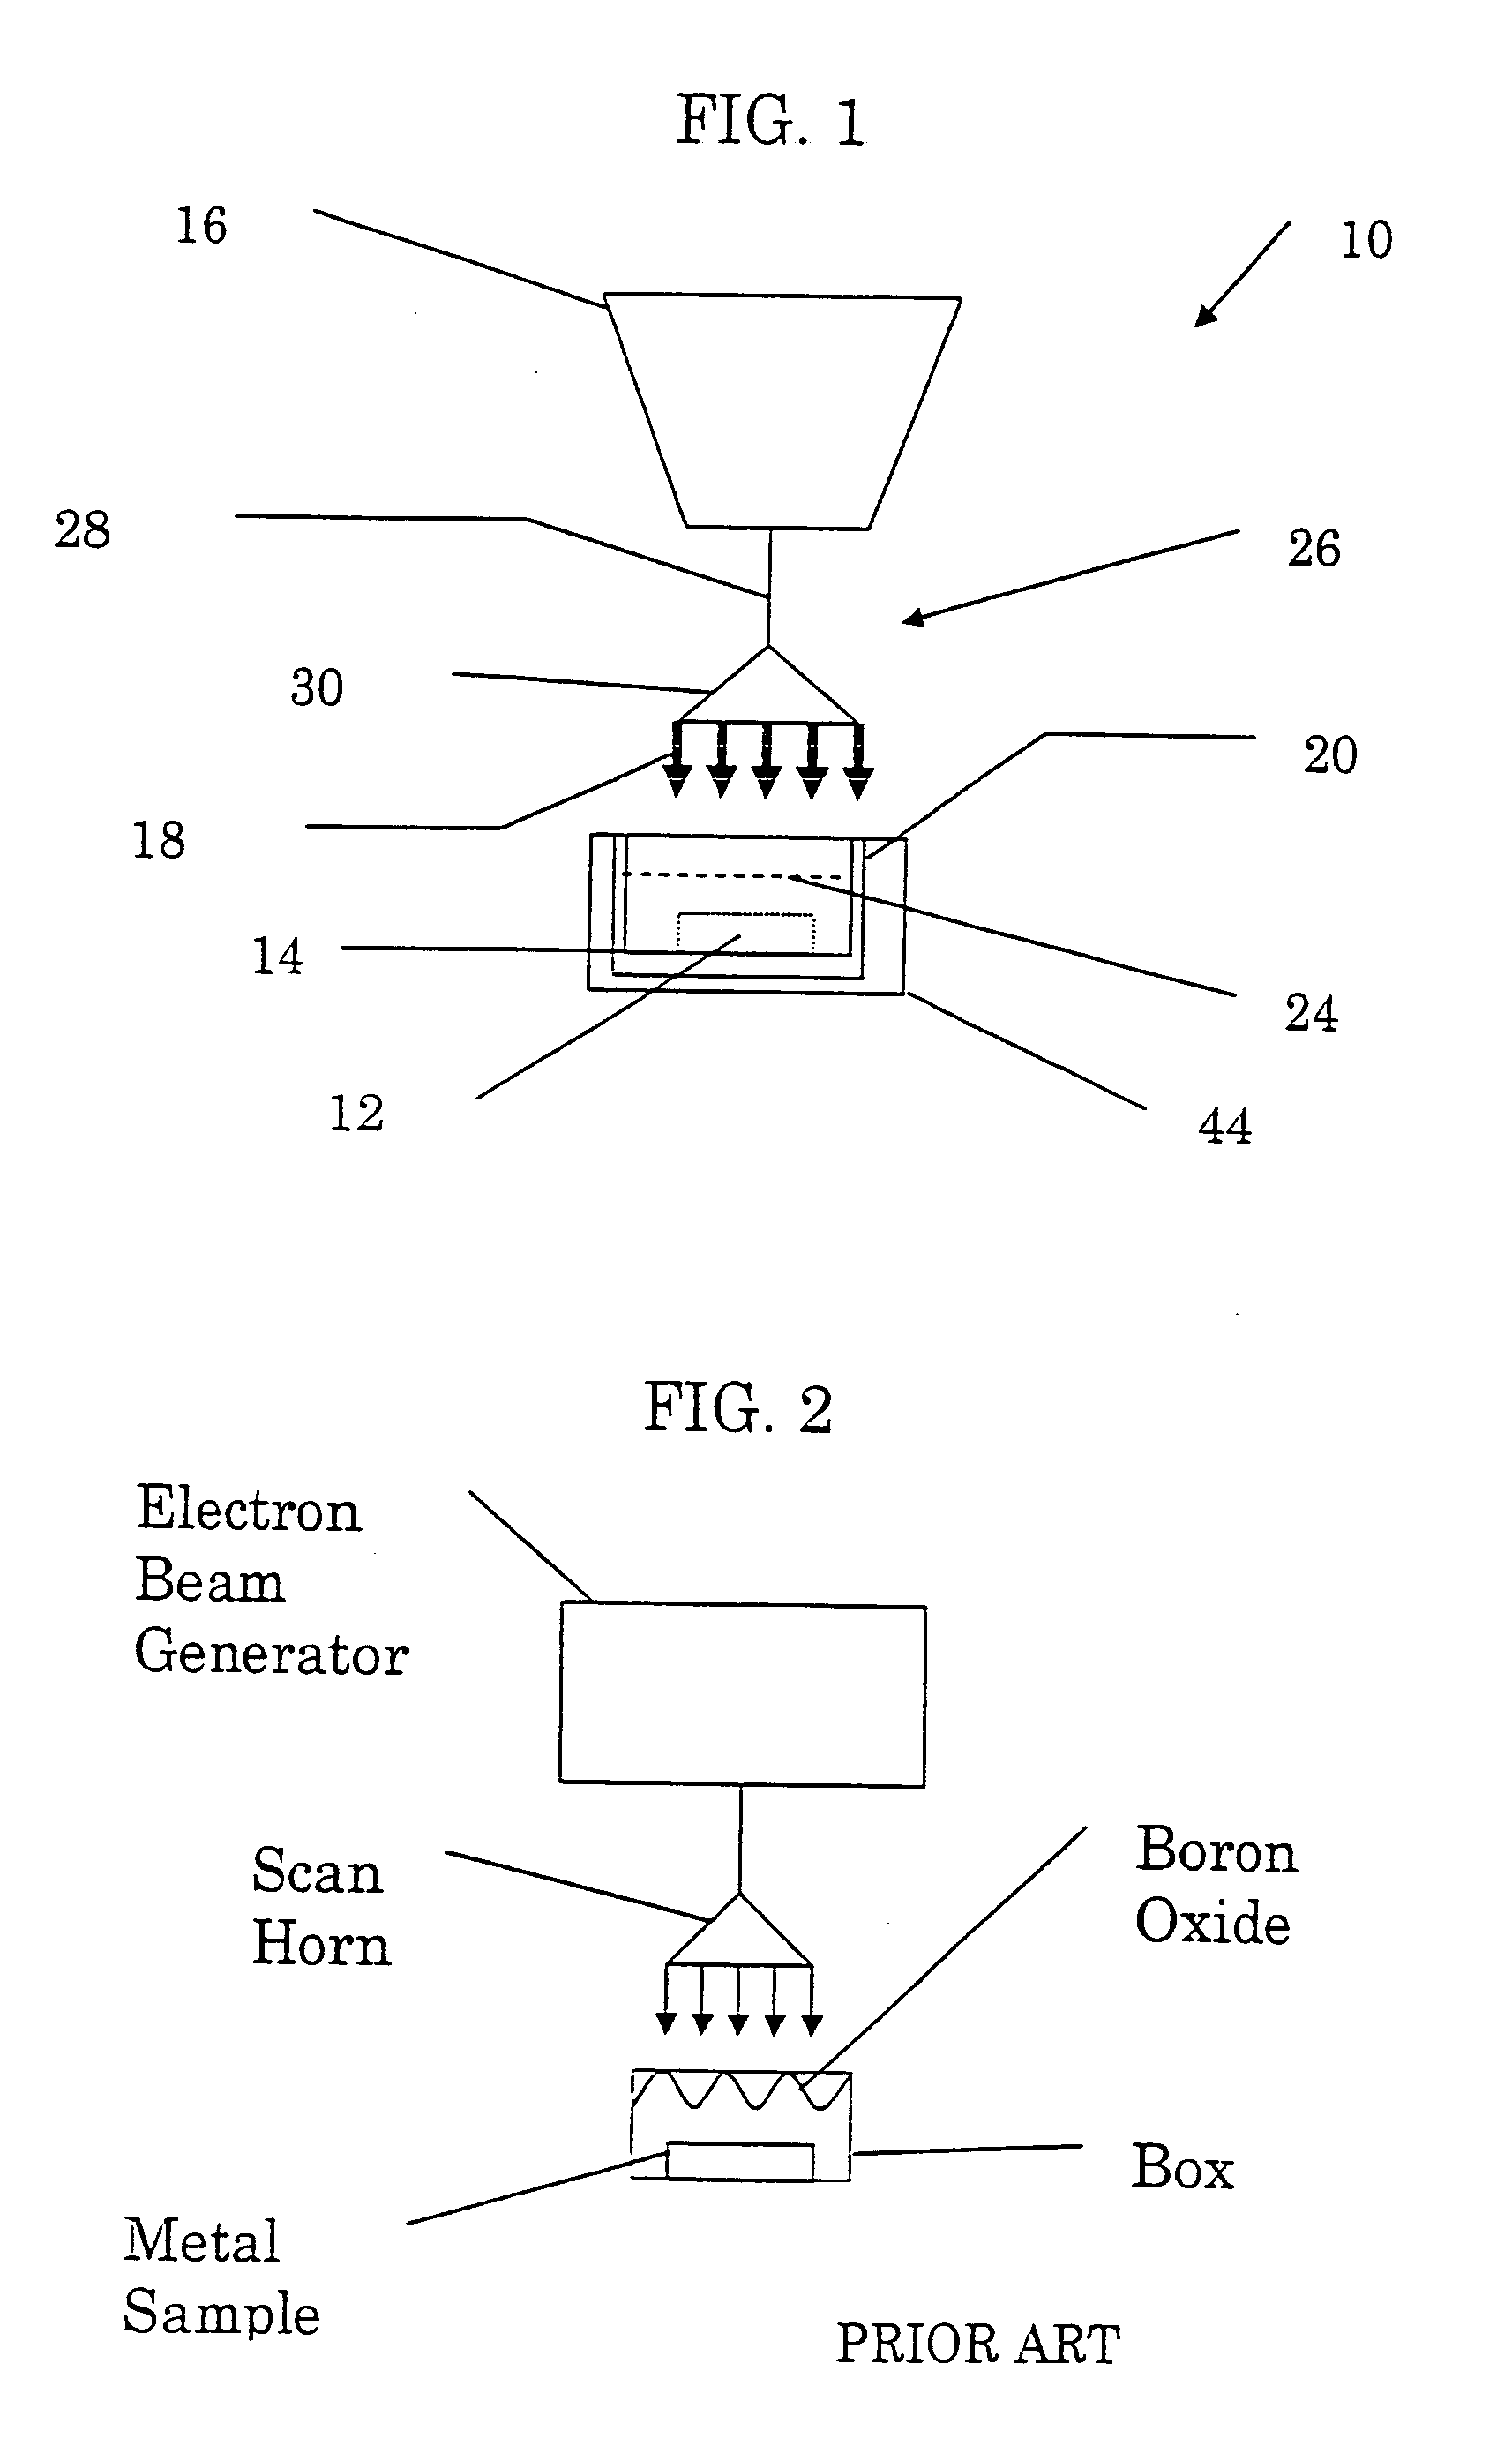 Apparatus and method using fractionated irradiation to harden metal